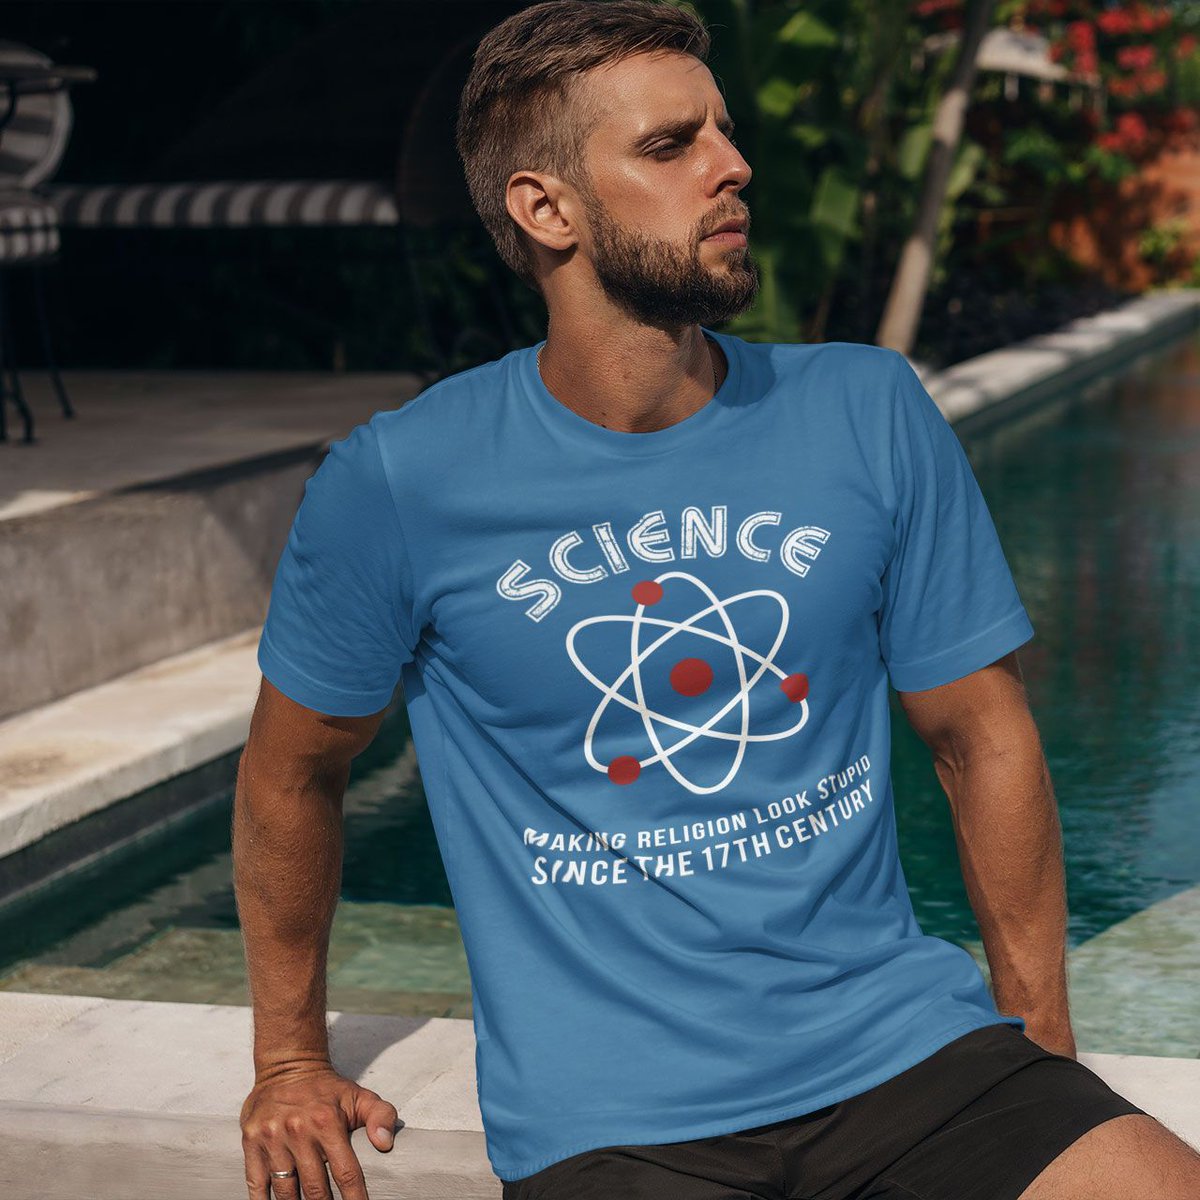 Science - making religions look stupid since the 17th century Get yours HERE >>> buff.ly/3H5bY6t